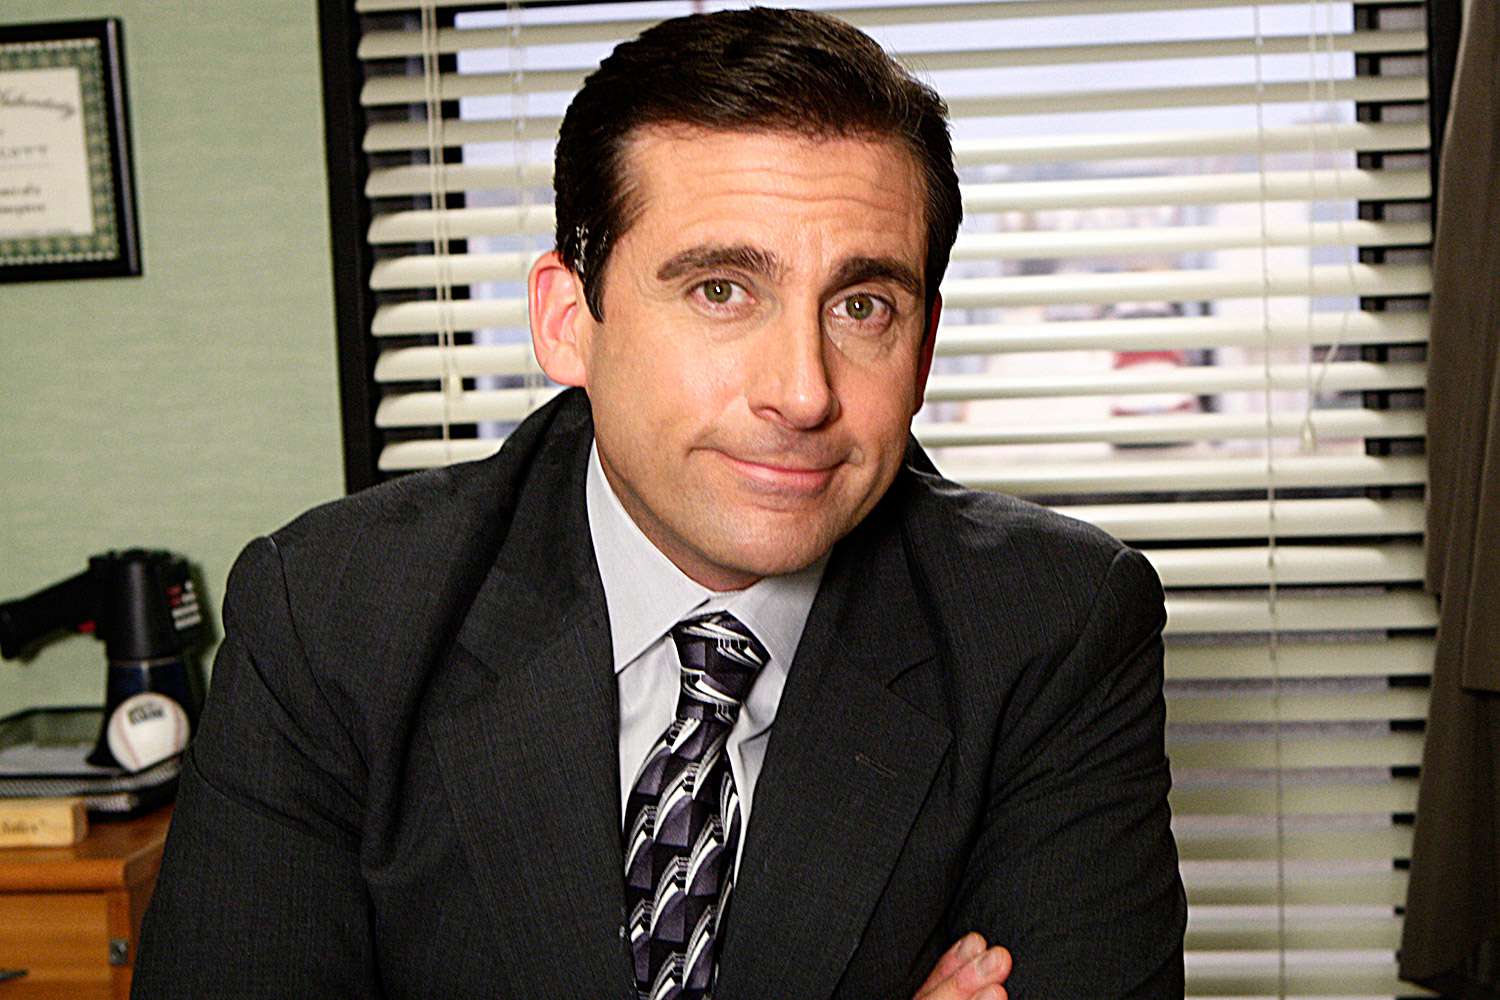 The Office Crew Claims Steve Carell Wanted to Stay on Show | PEOPLE.com